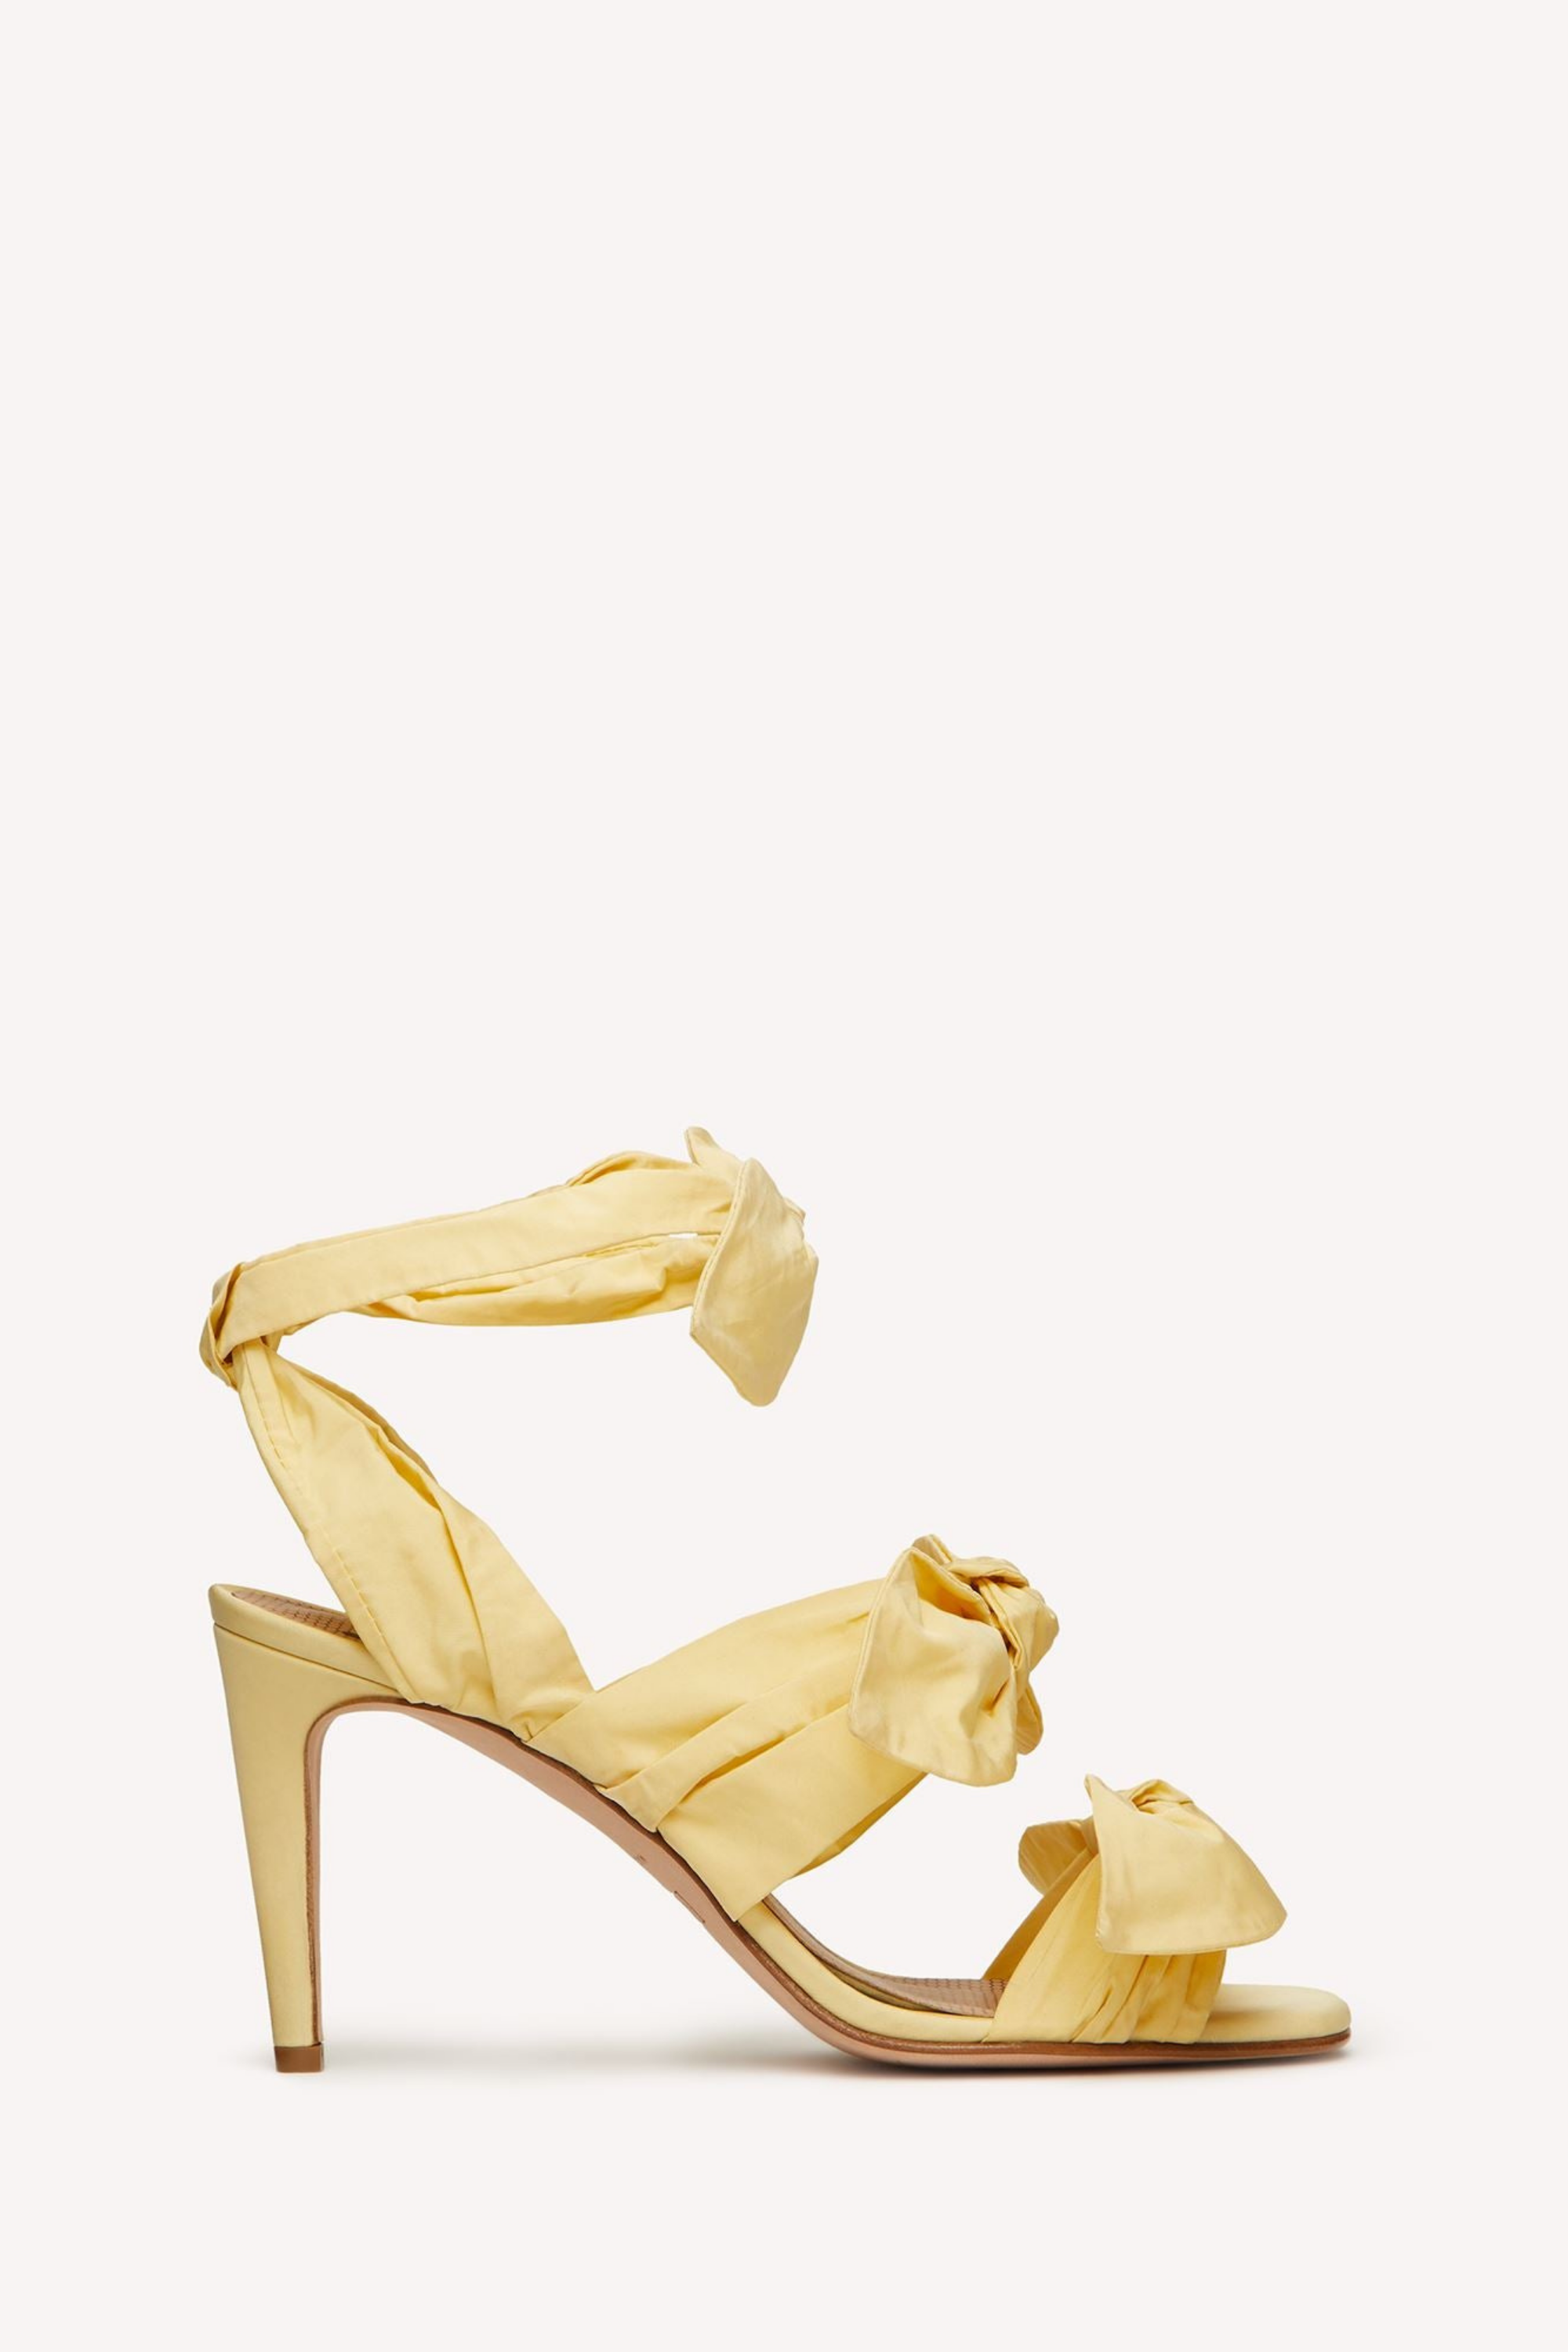 Knot Me Up Sandal by Red Valentino, Taffetas, Colour: Vanilla, Made in Italy, New Arrivals, SS22, Espace Cannelle